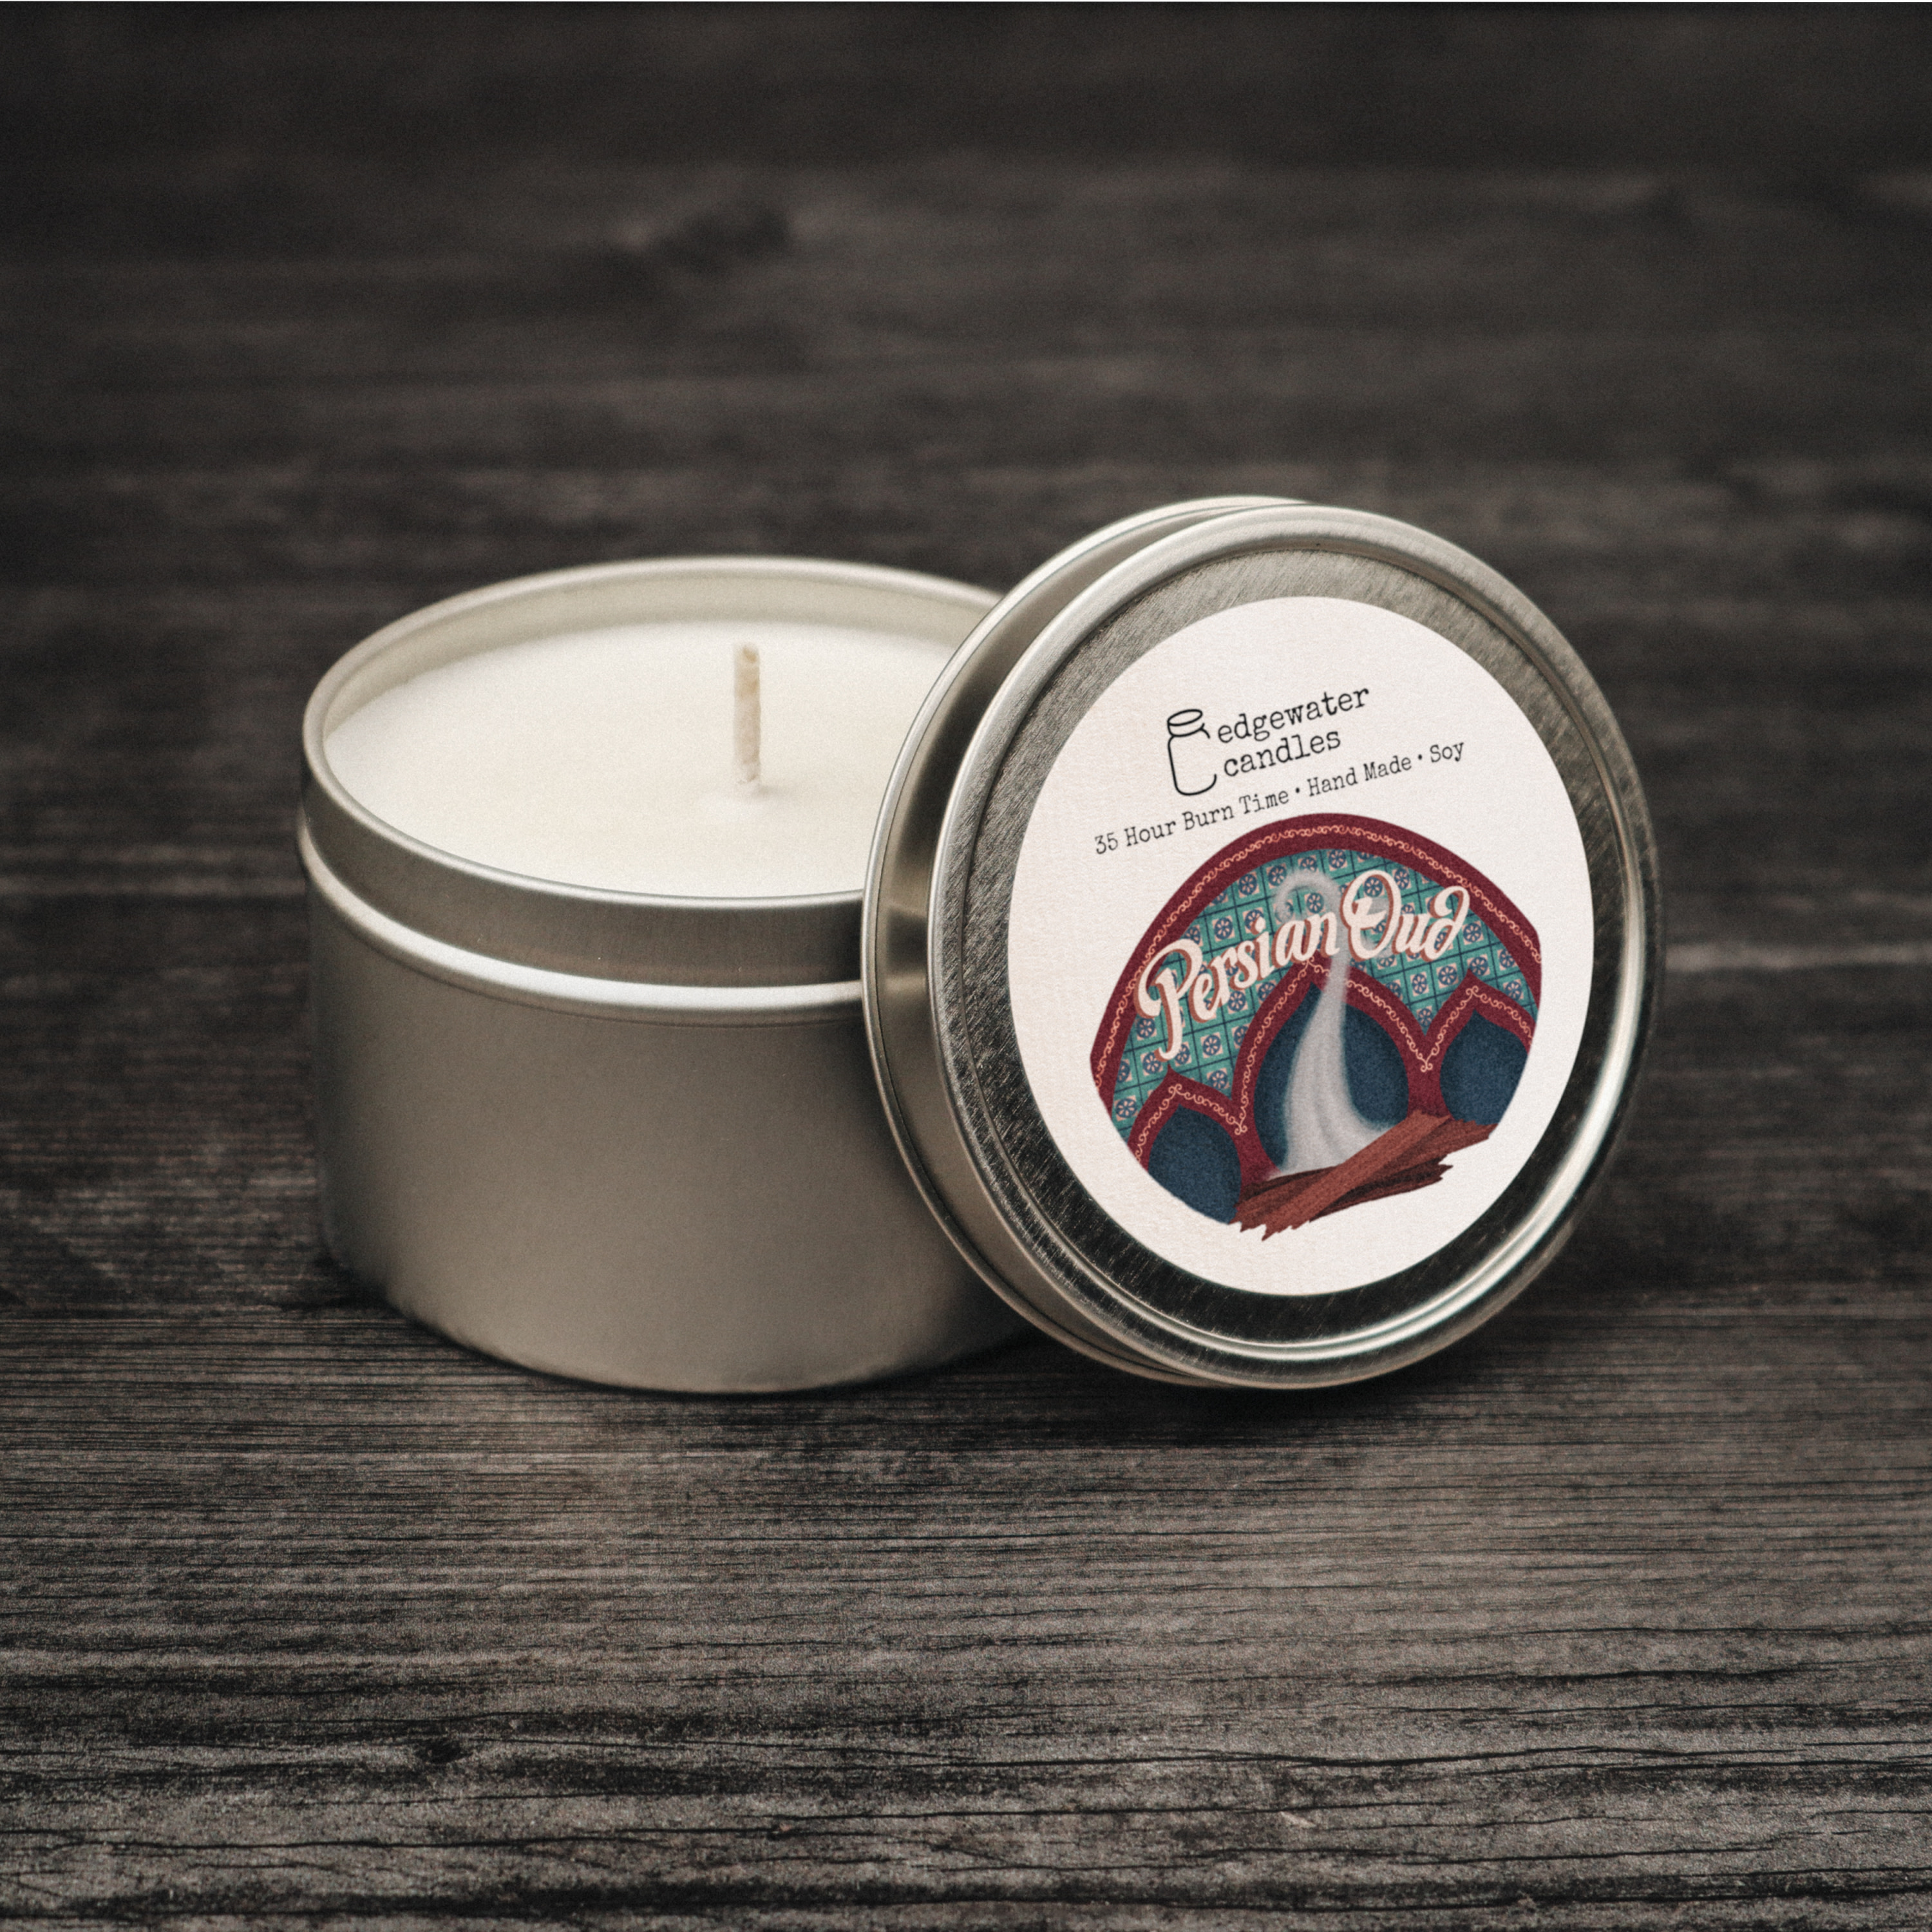 Persian Oud Travel Tin Candle by Edgewater Candles